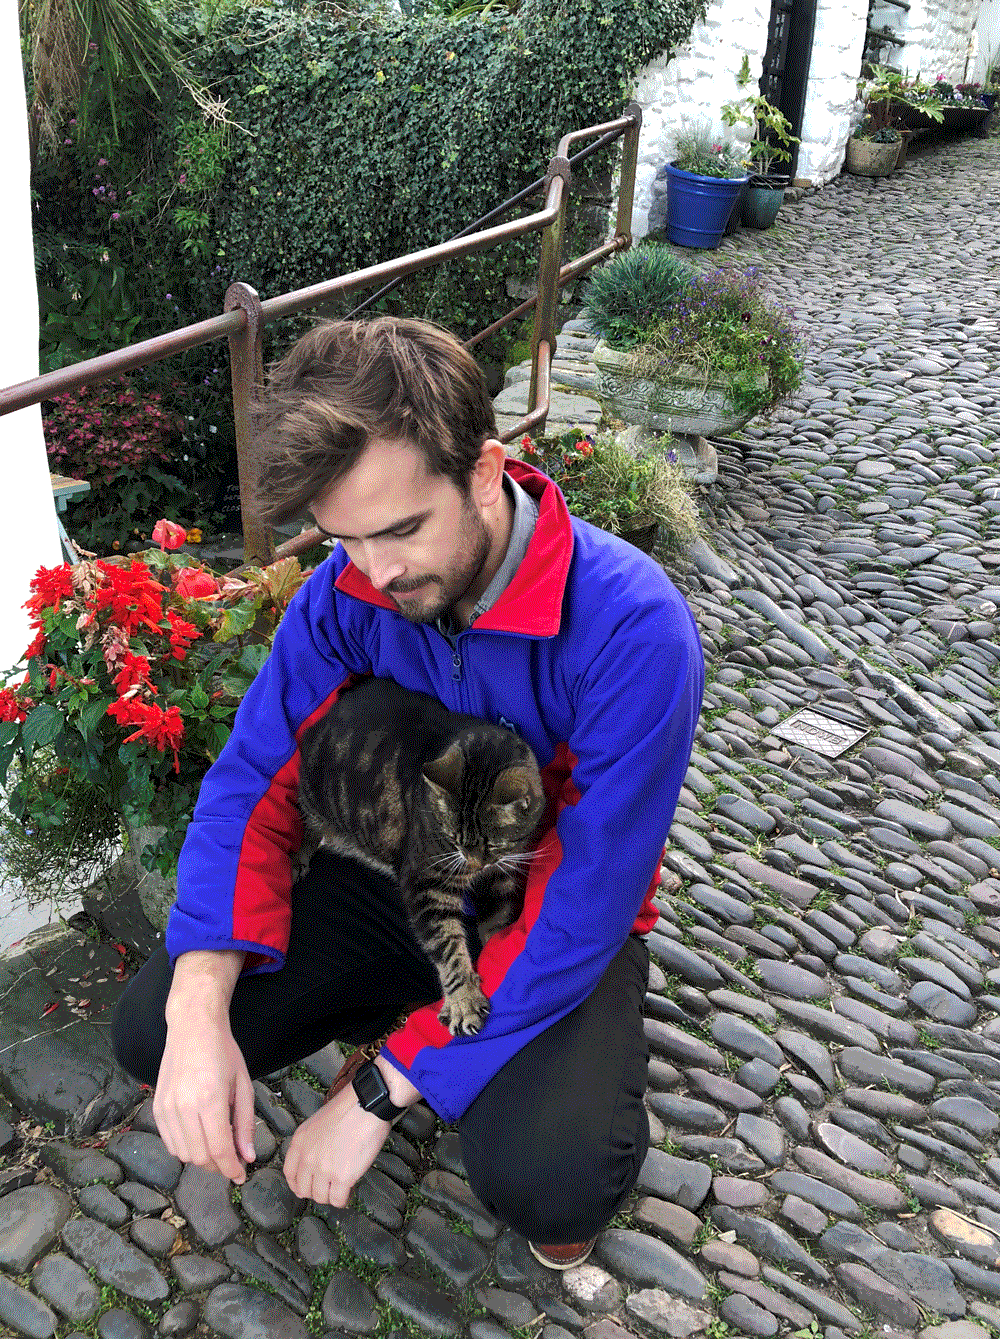 Man and cat in Clovelly